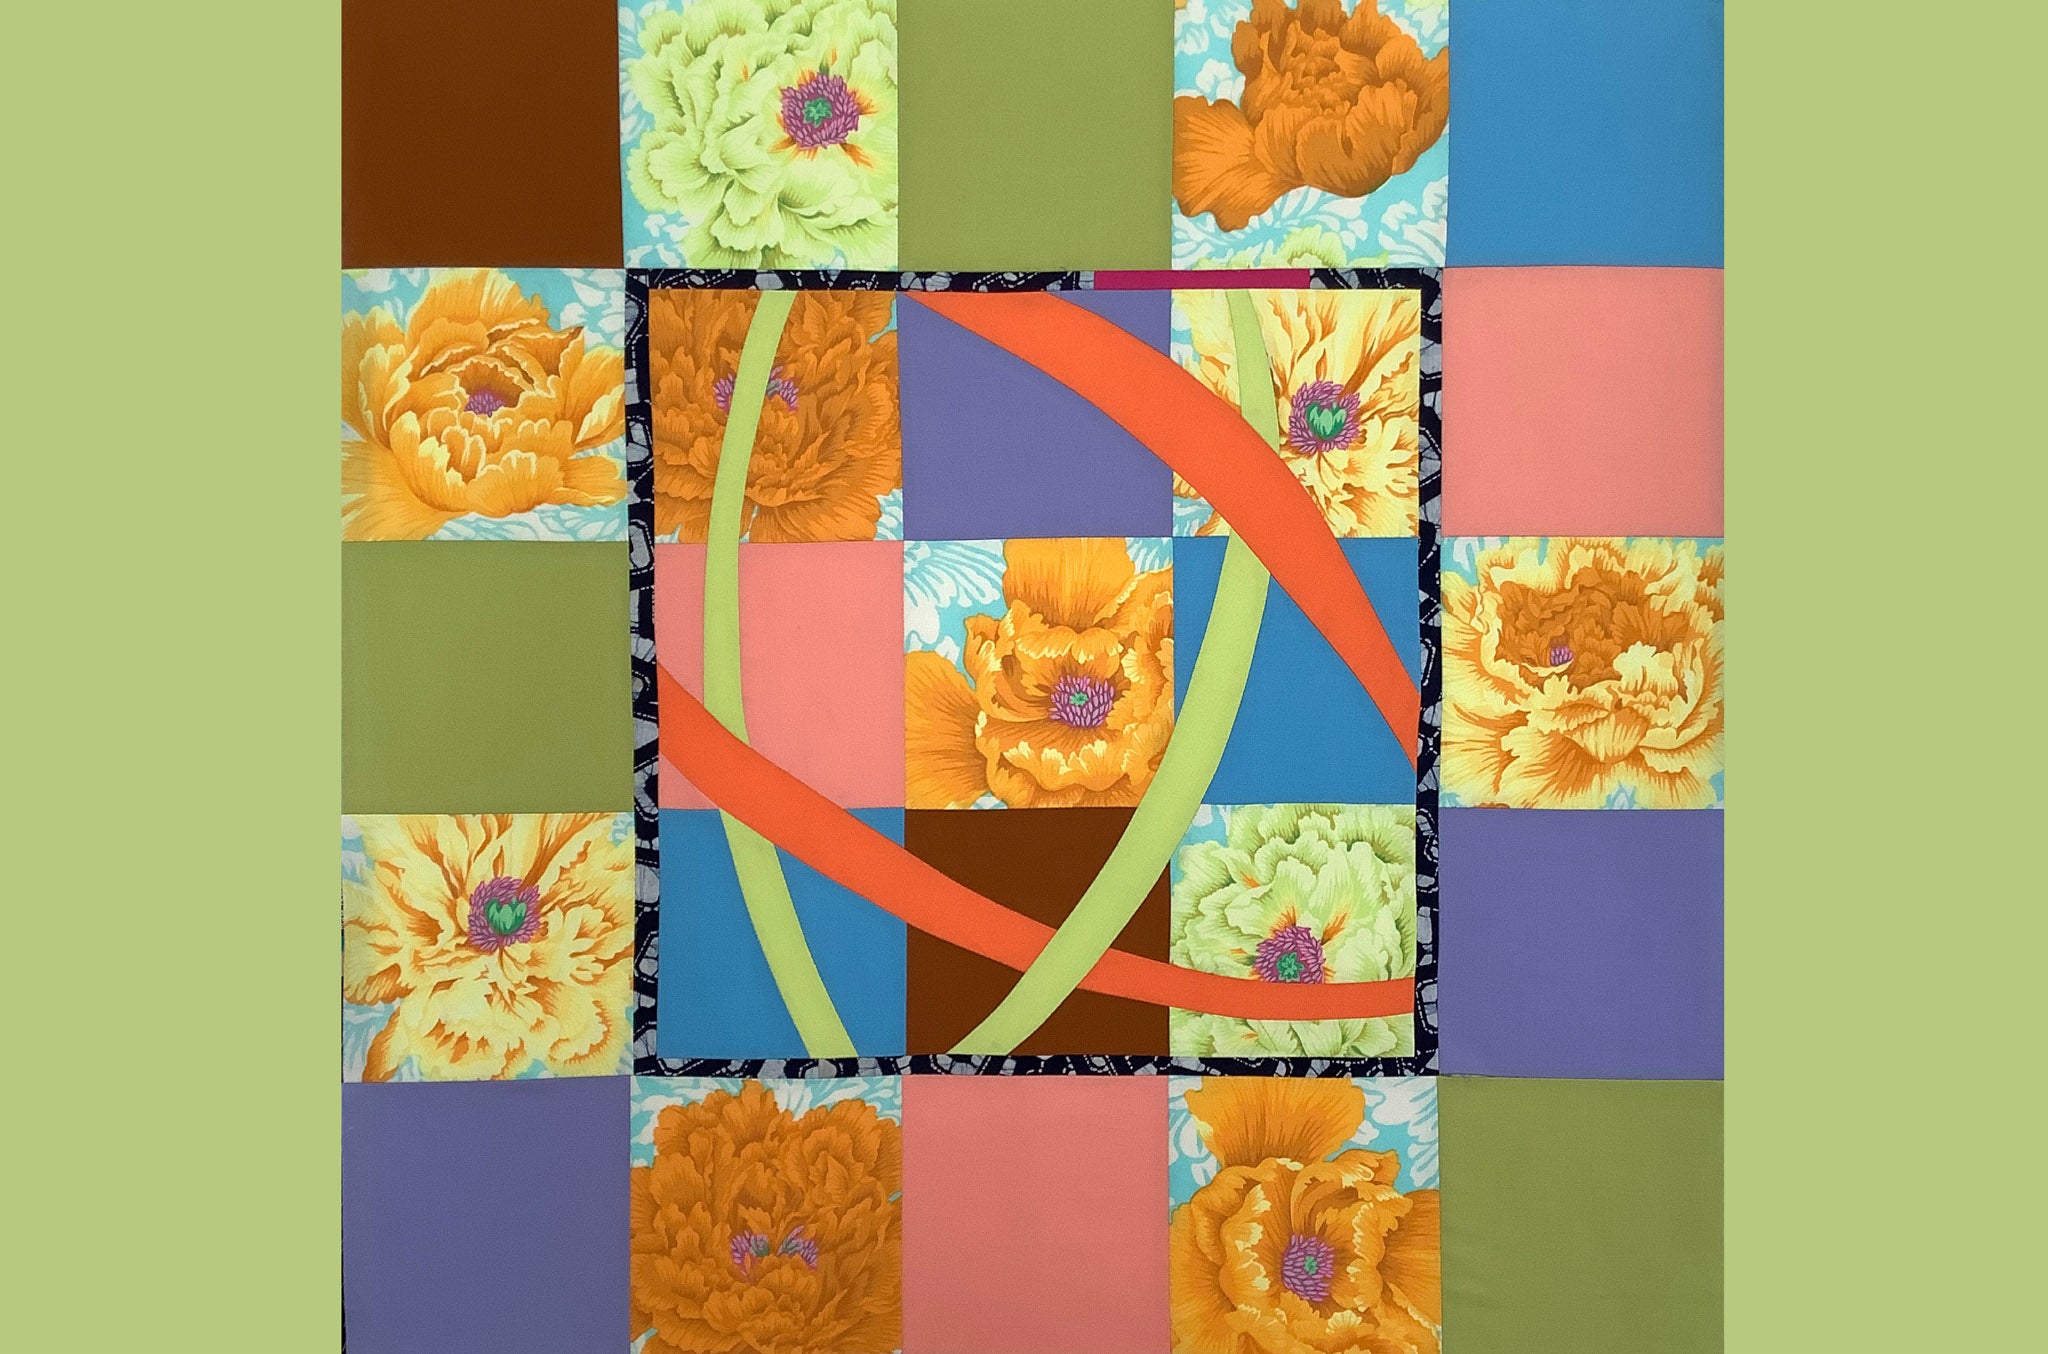 Centrum Quilt, a student project from the Creativity & Inserted Curves workshop taught by Patricia Belyea of Okan Arts